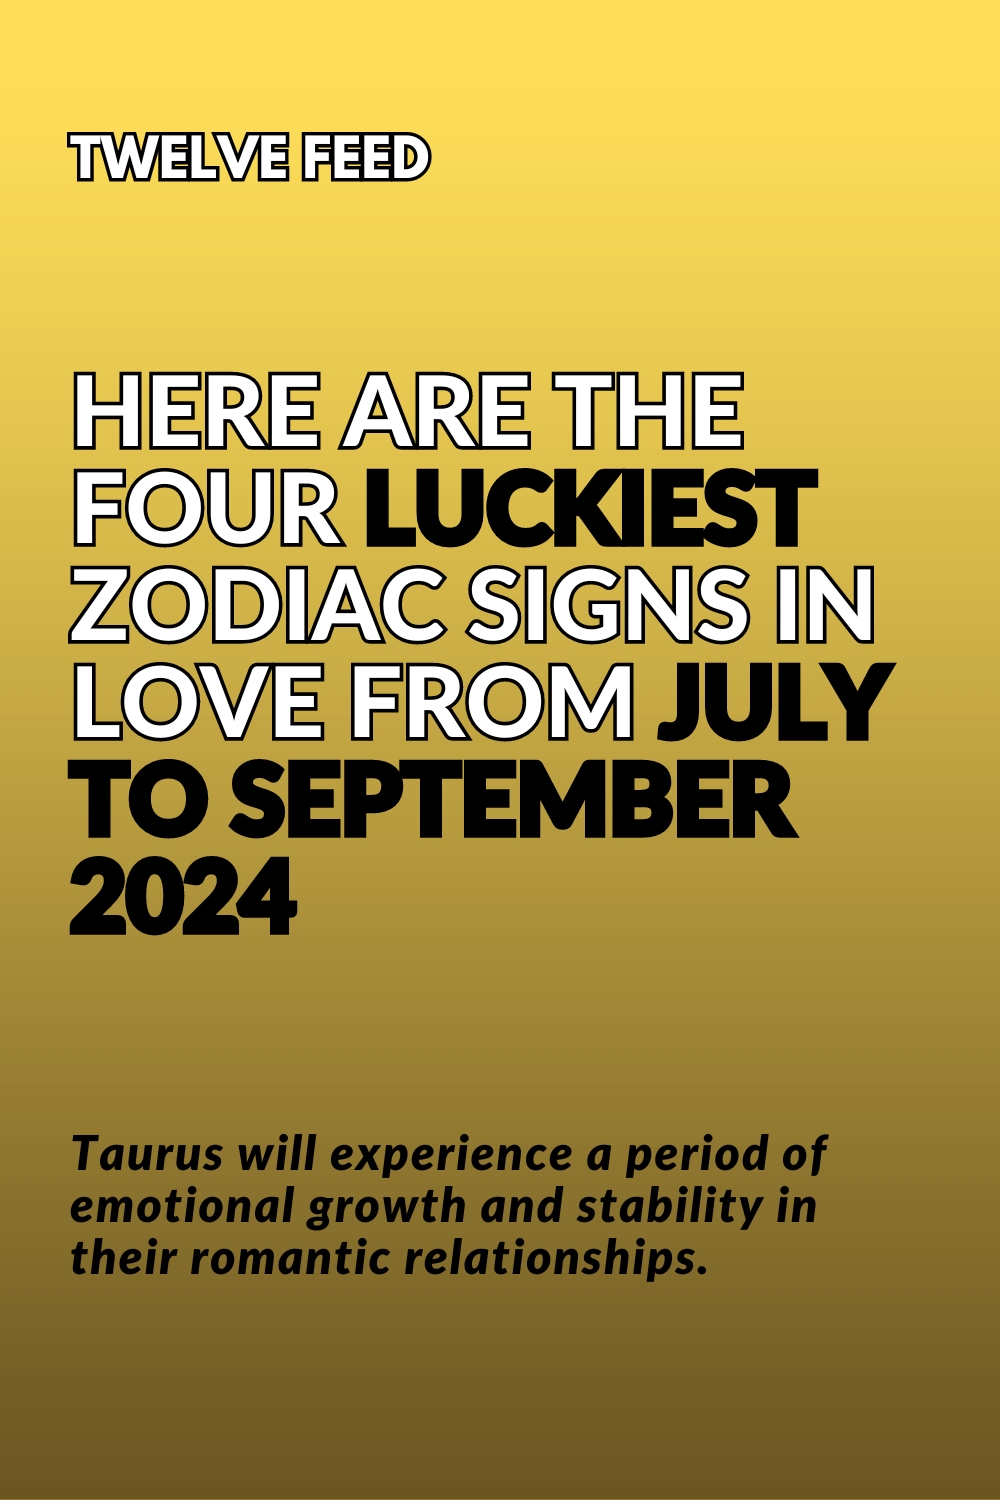 Here Are The Four Luckiest Zodiac Signs In Love From July To September 2024